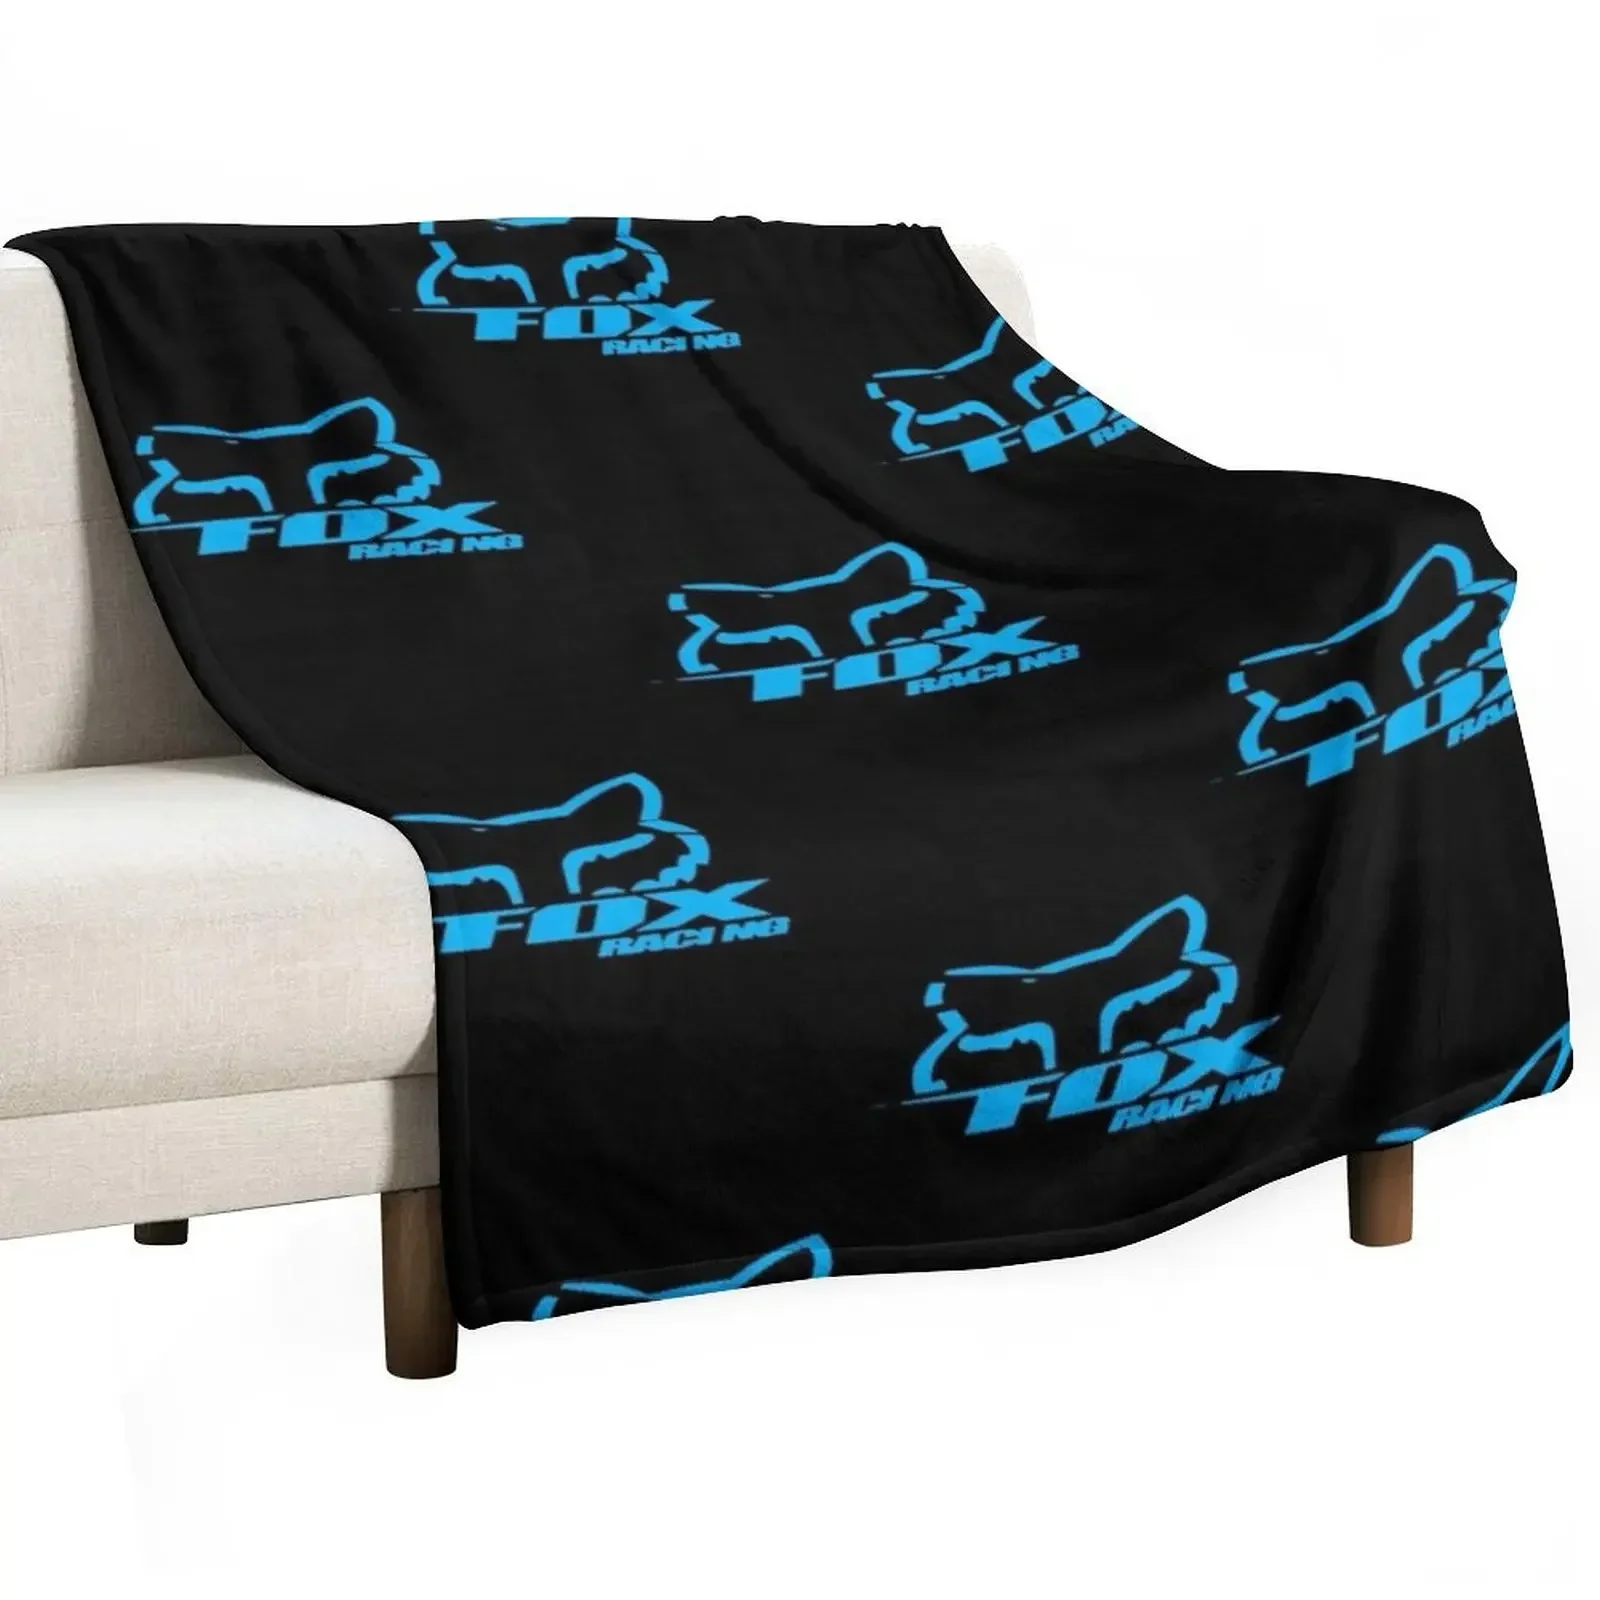 

blue of racing face Throw Blanket Flannel Fluffy Shaggy Blankets For Baby Moving Blankets